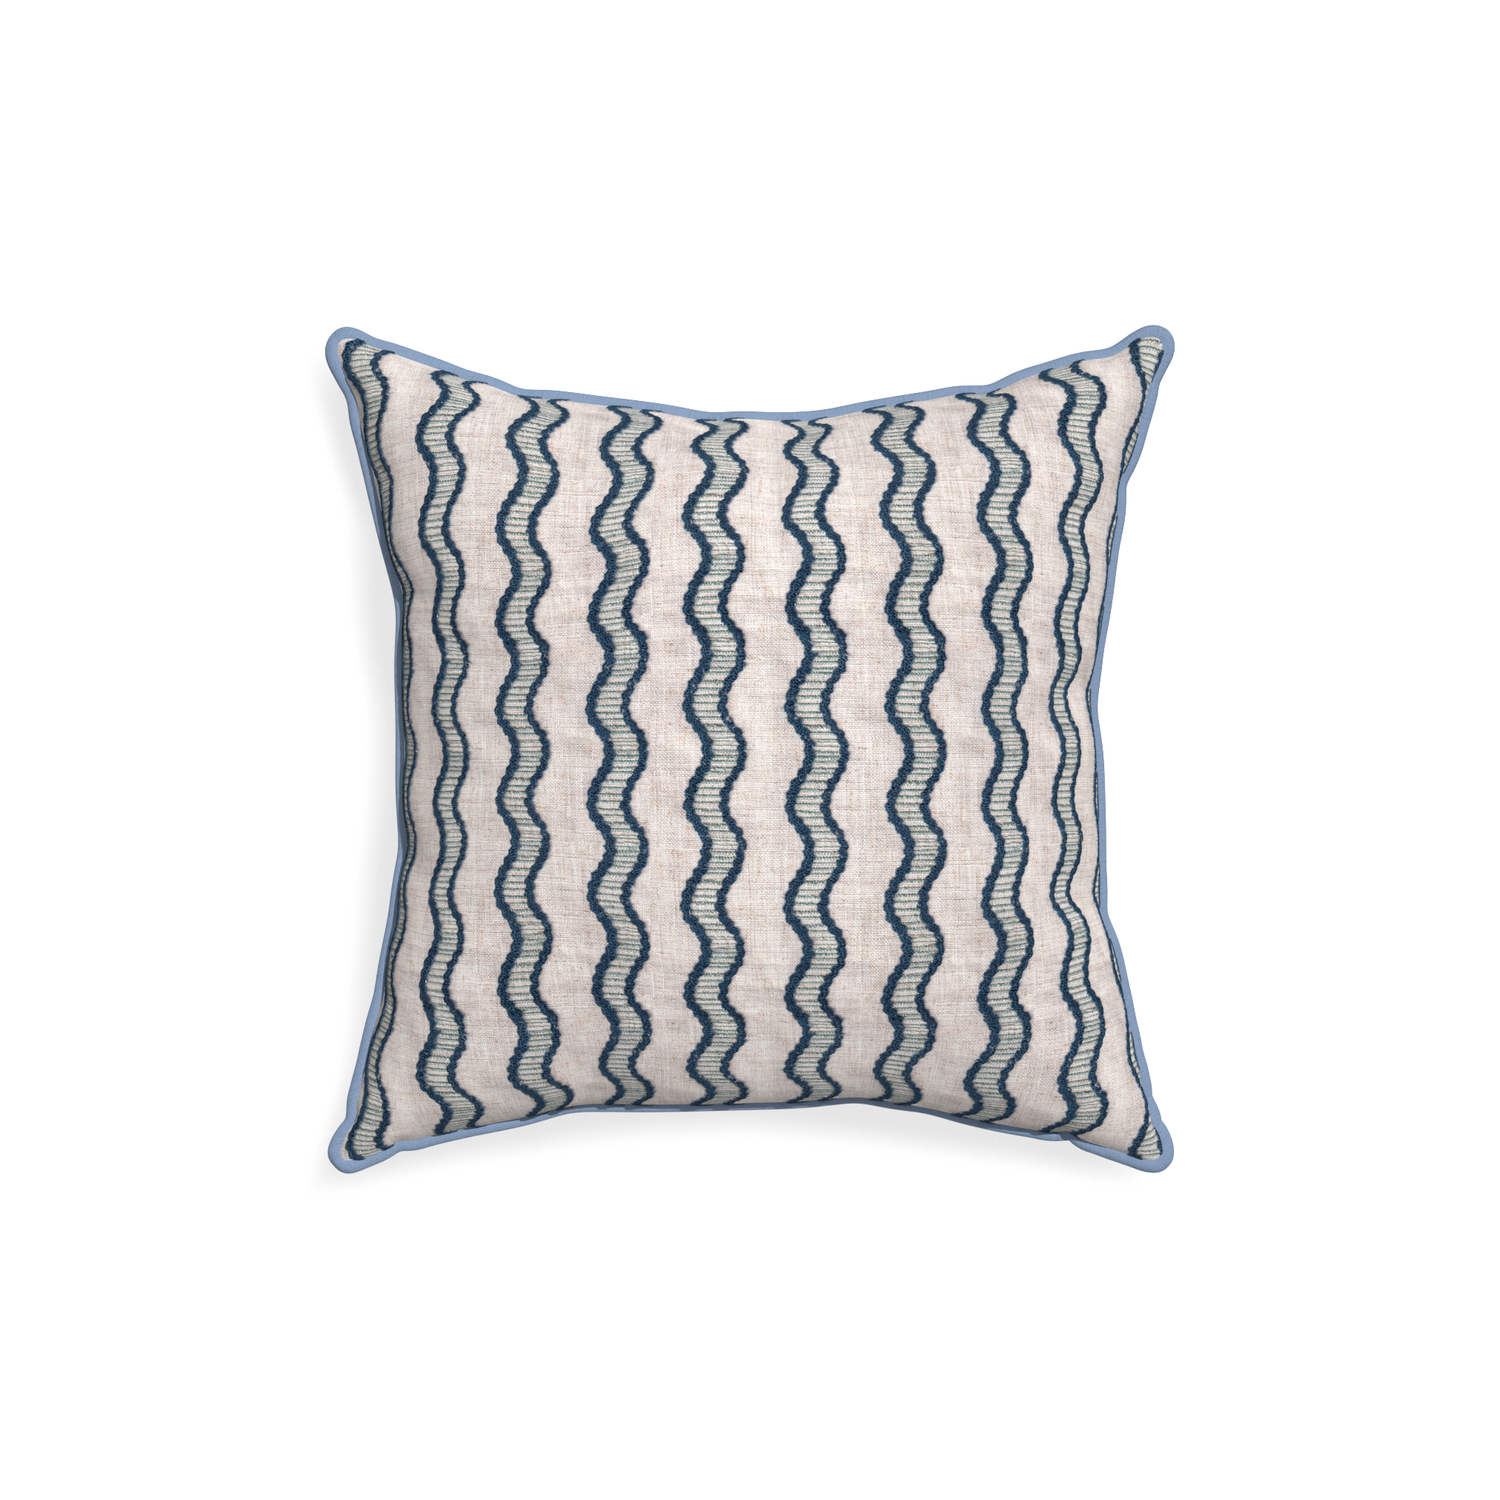 18-square beatrice custom embroidered wavepillow with sky piping on white background